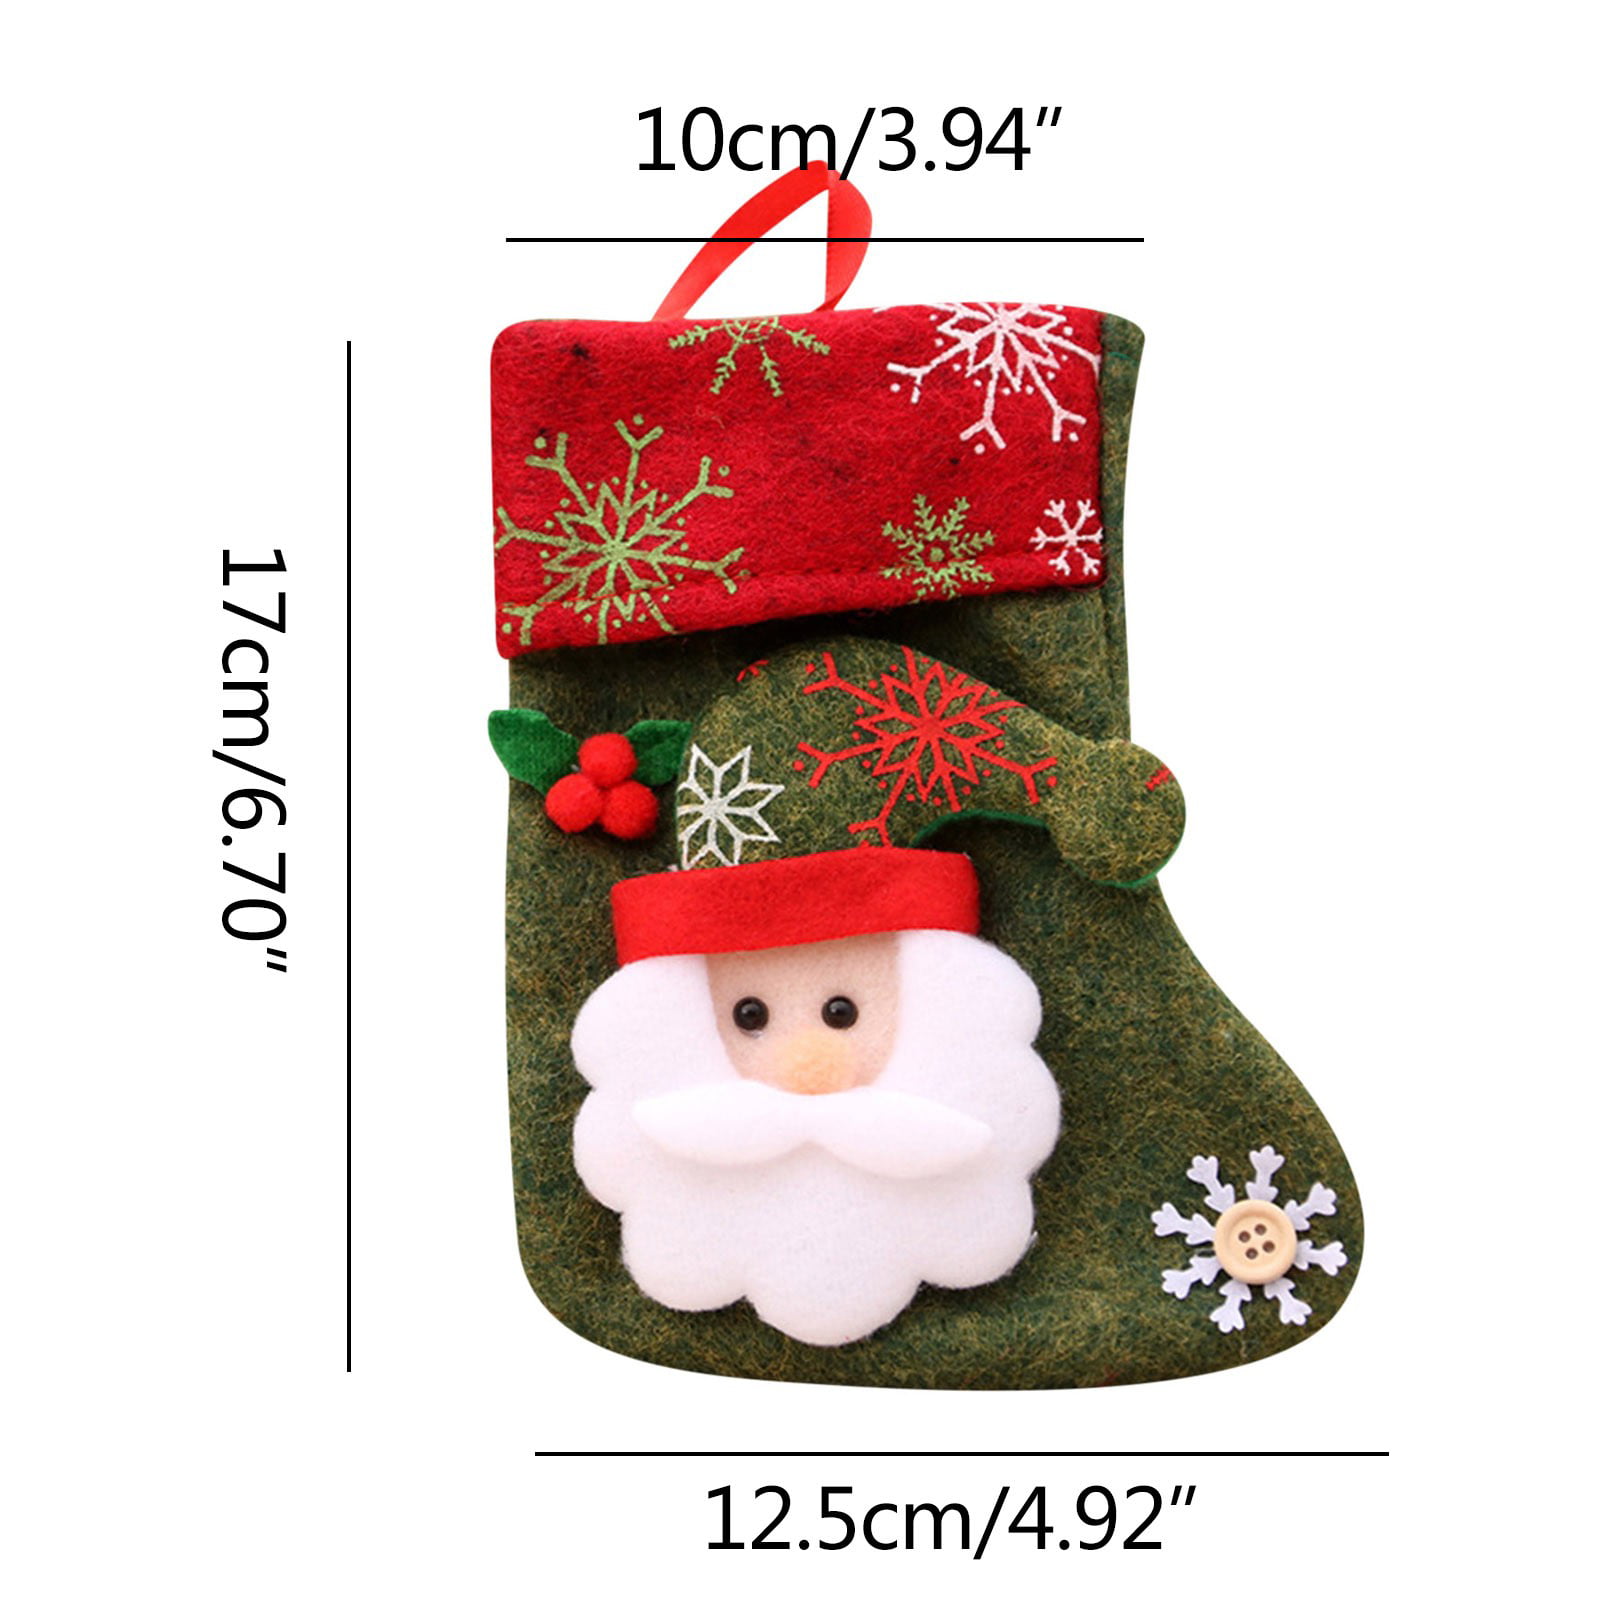 19inch 3D Felt Santa Claus Details about   Character Plush Christmas Stockings for Family 